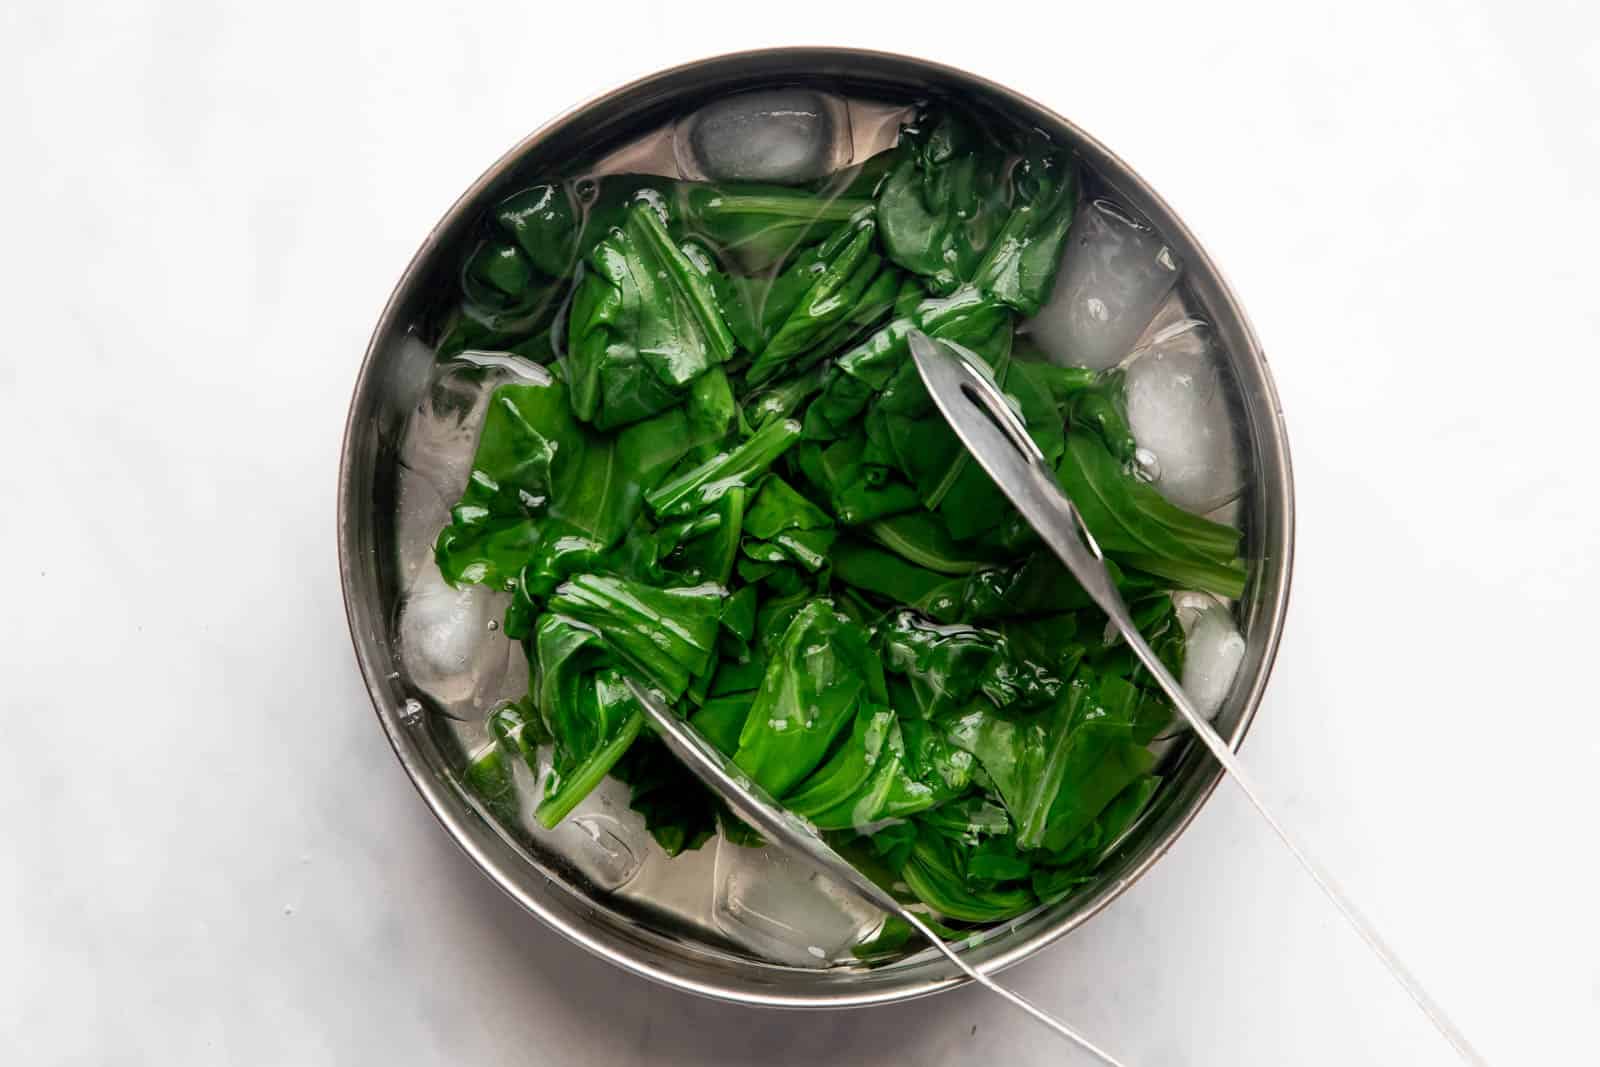 Blanched spinach dunked in ice cold water to stop the cooking process